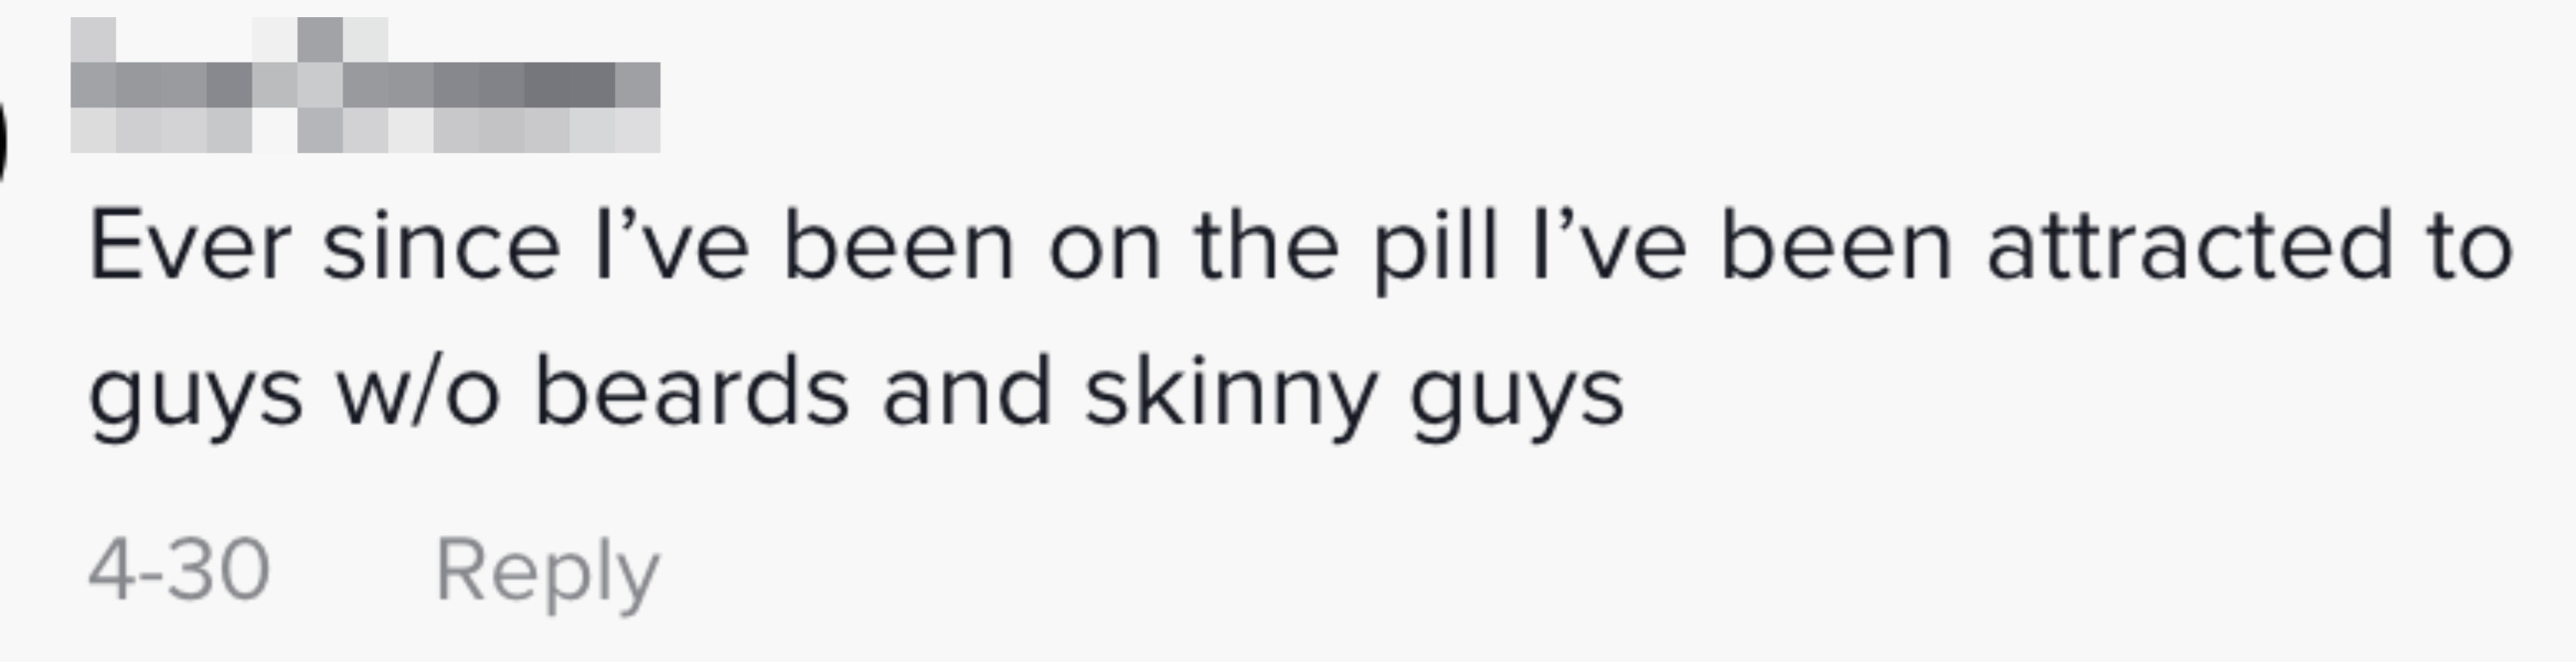 A commenter saying that since they started the pill, they&#x27;ve been attracted to guys without beards and skinny guys